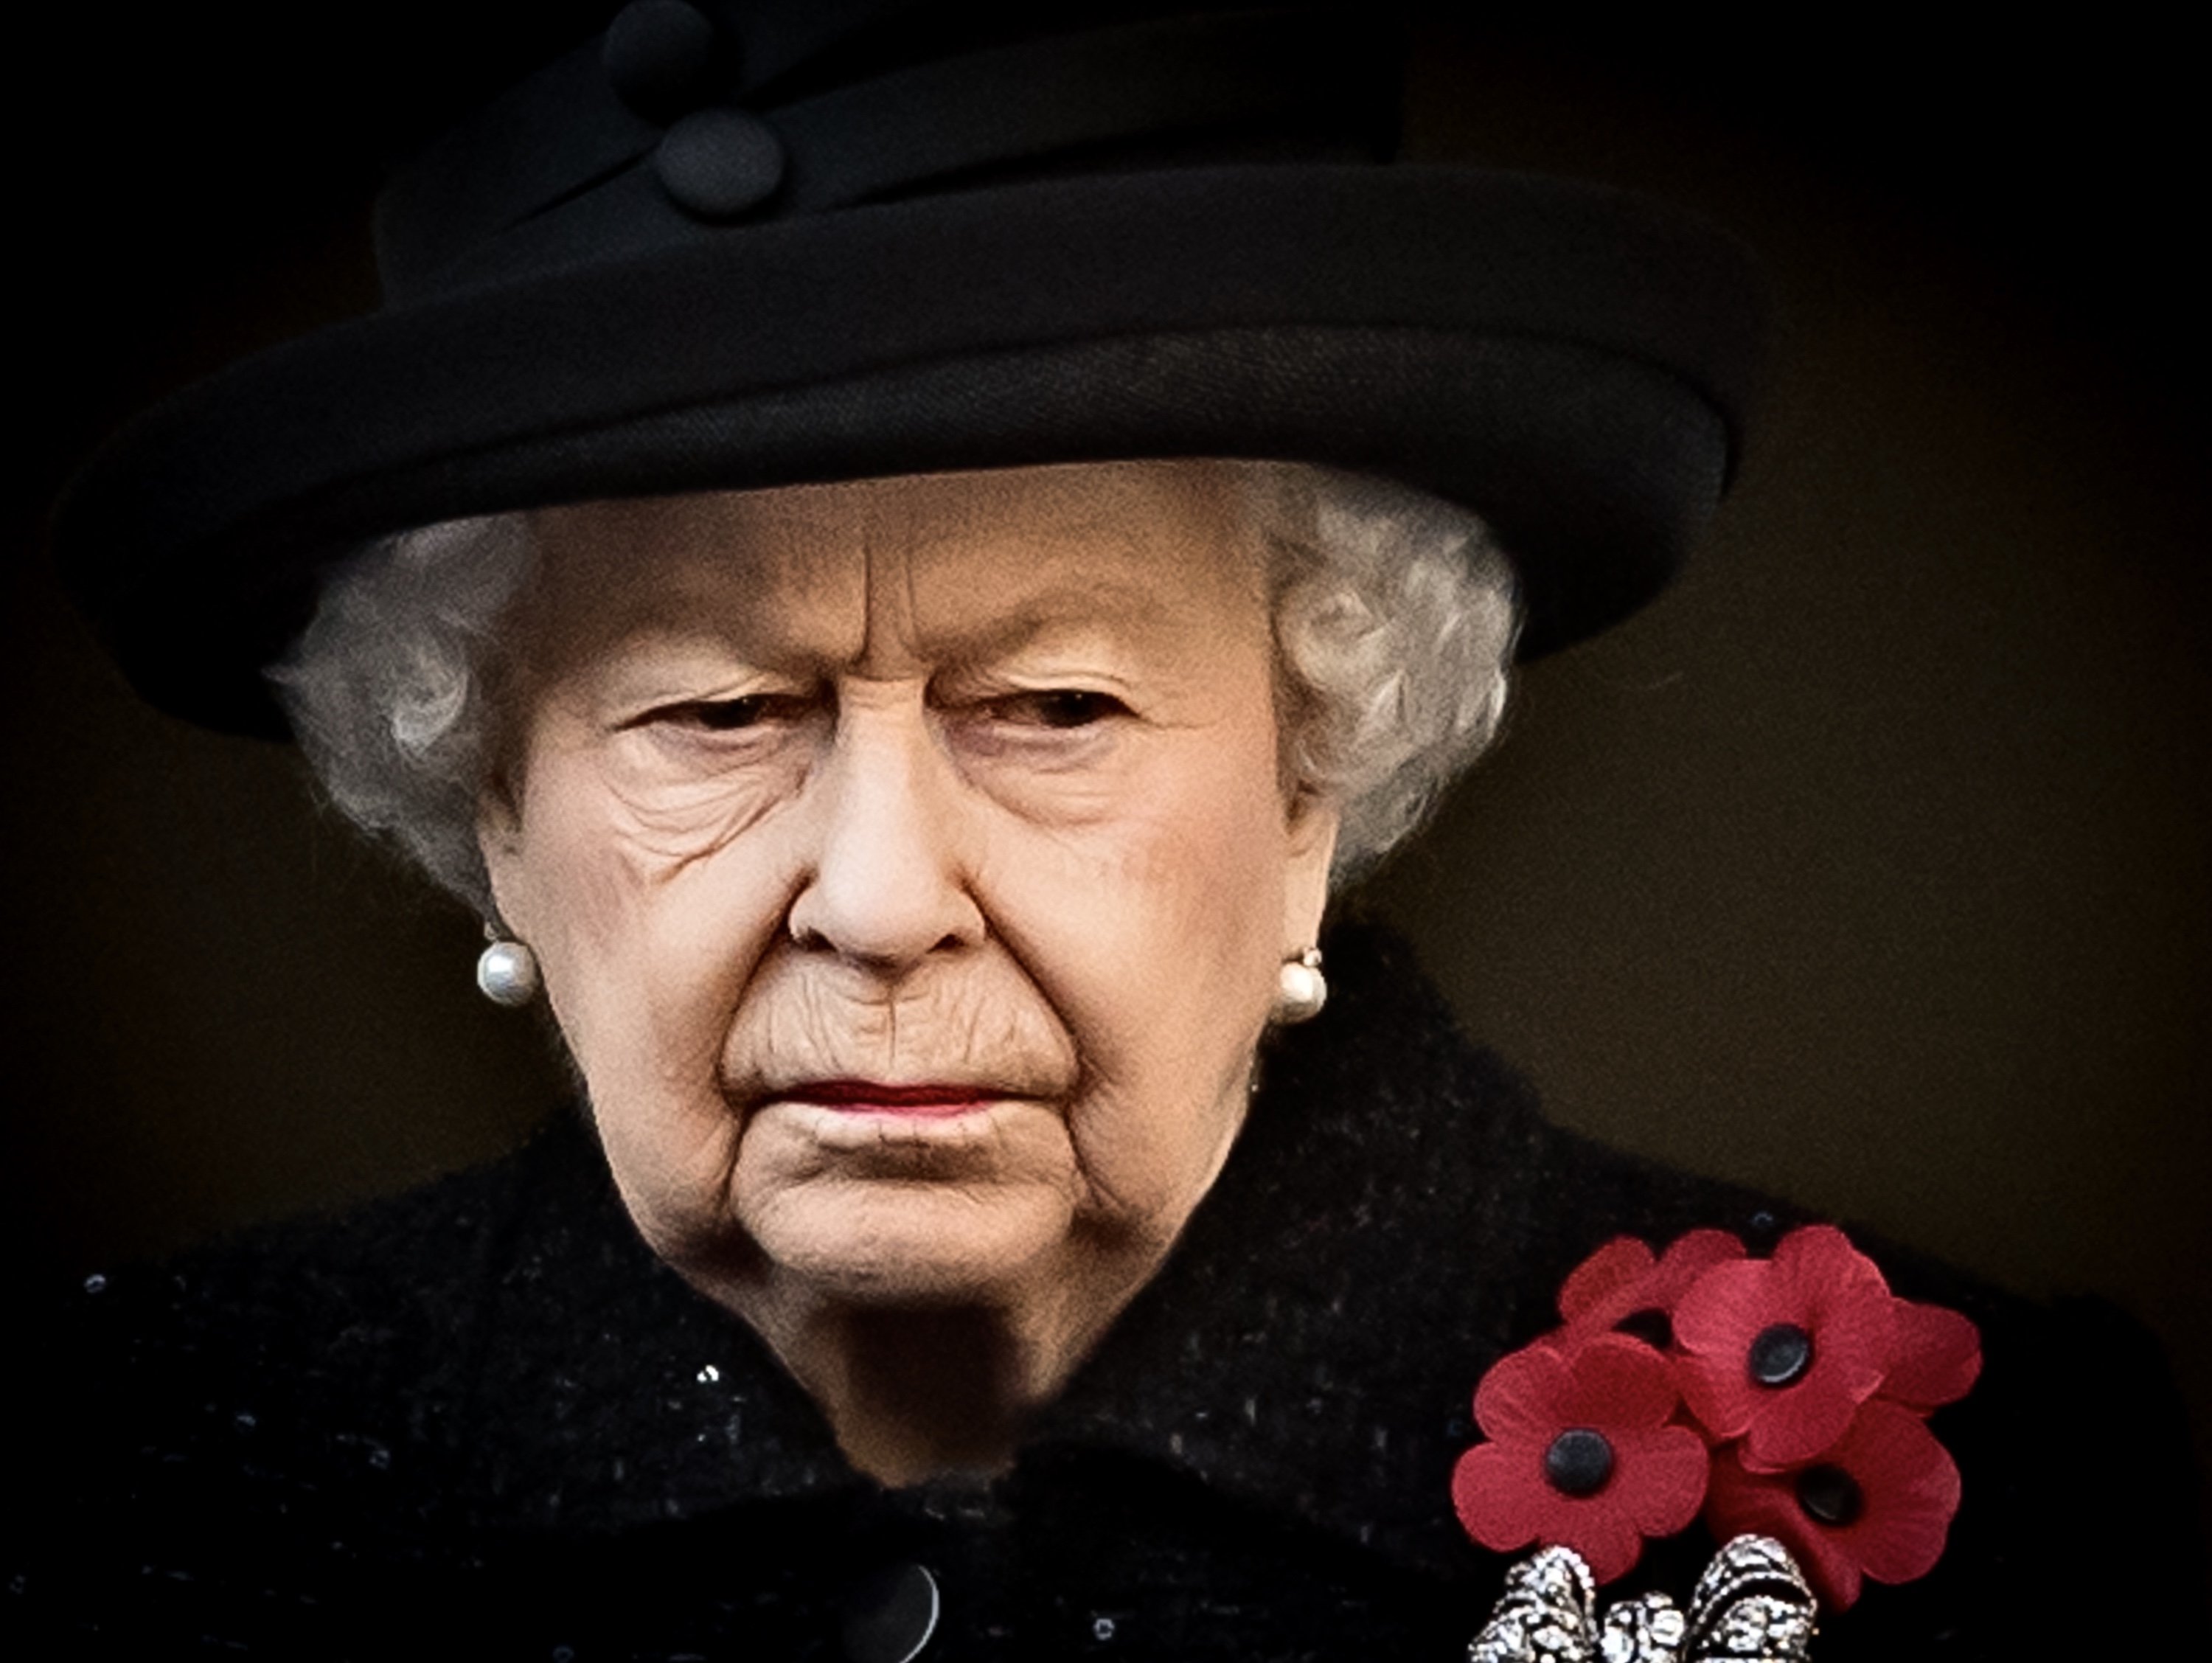 Queen Elizabeth II at the annual Remembrance Sunday memorial at The Cenotaph on November 10, 2019 in London, England. | Source: Getty Images